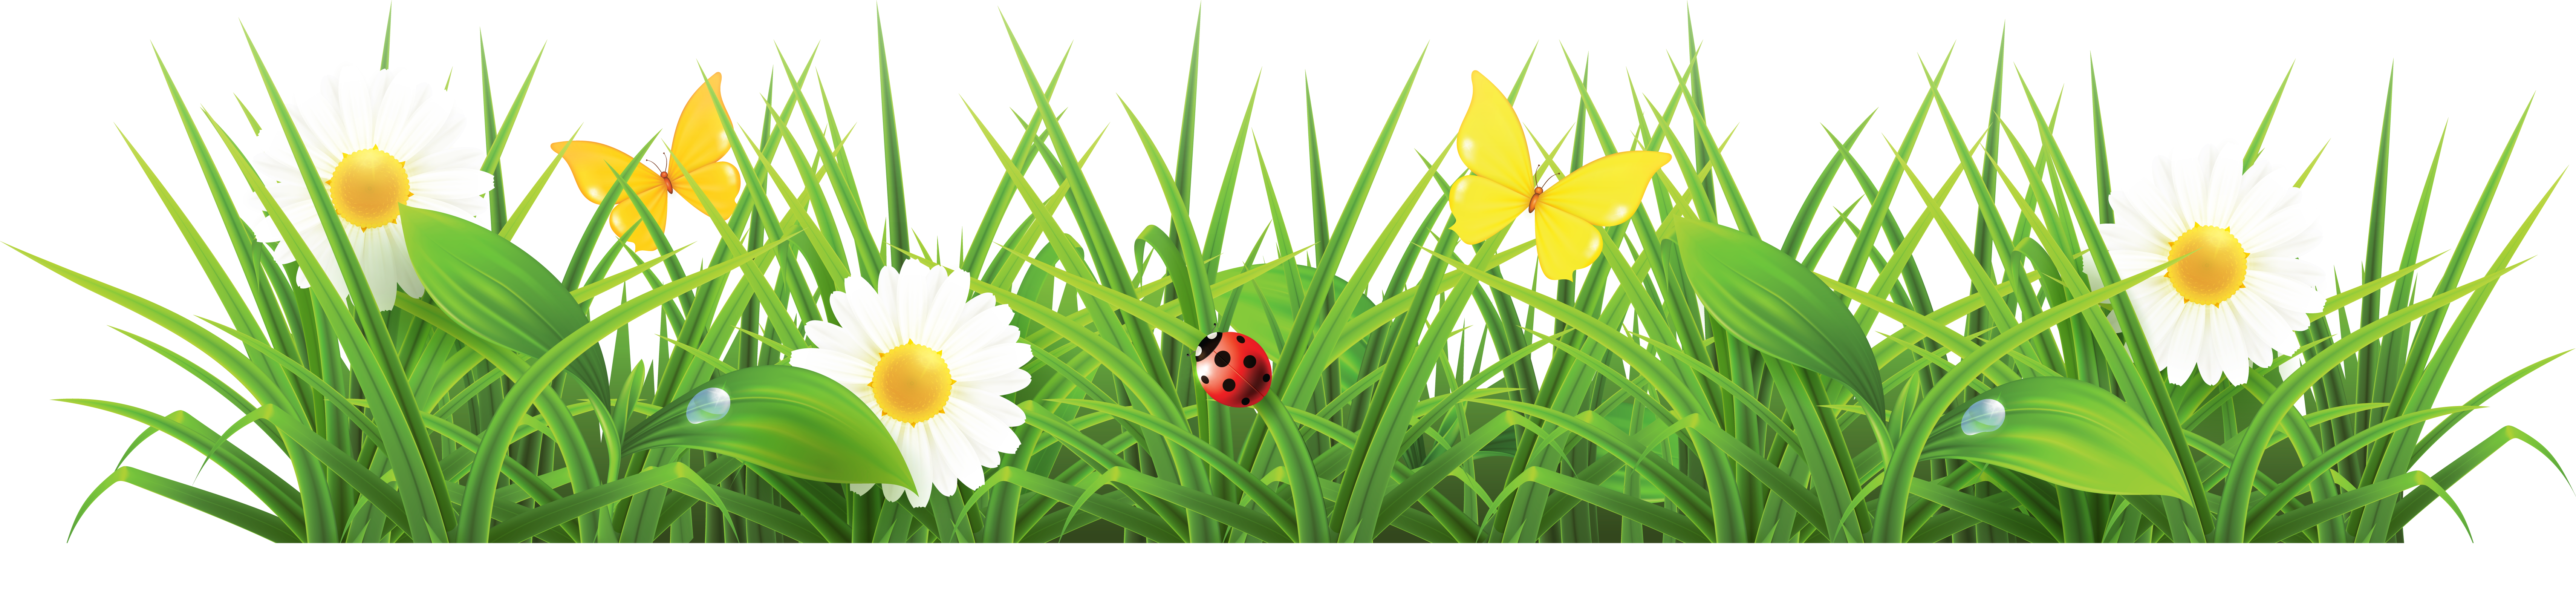 Grass ground with flowers clipart picture 0